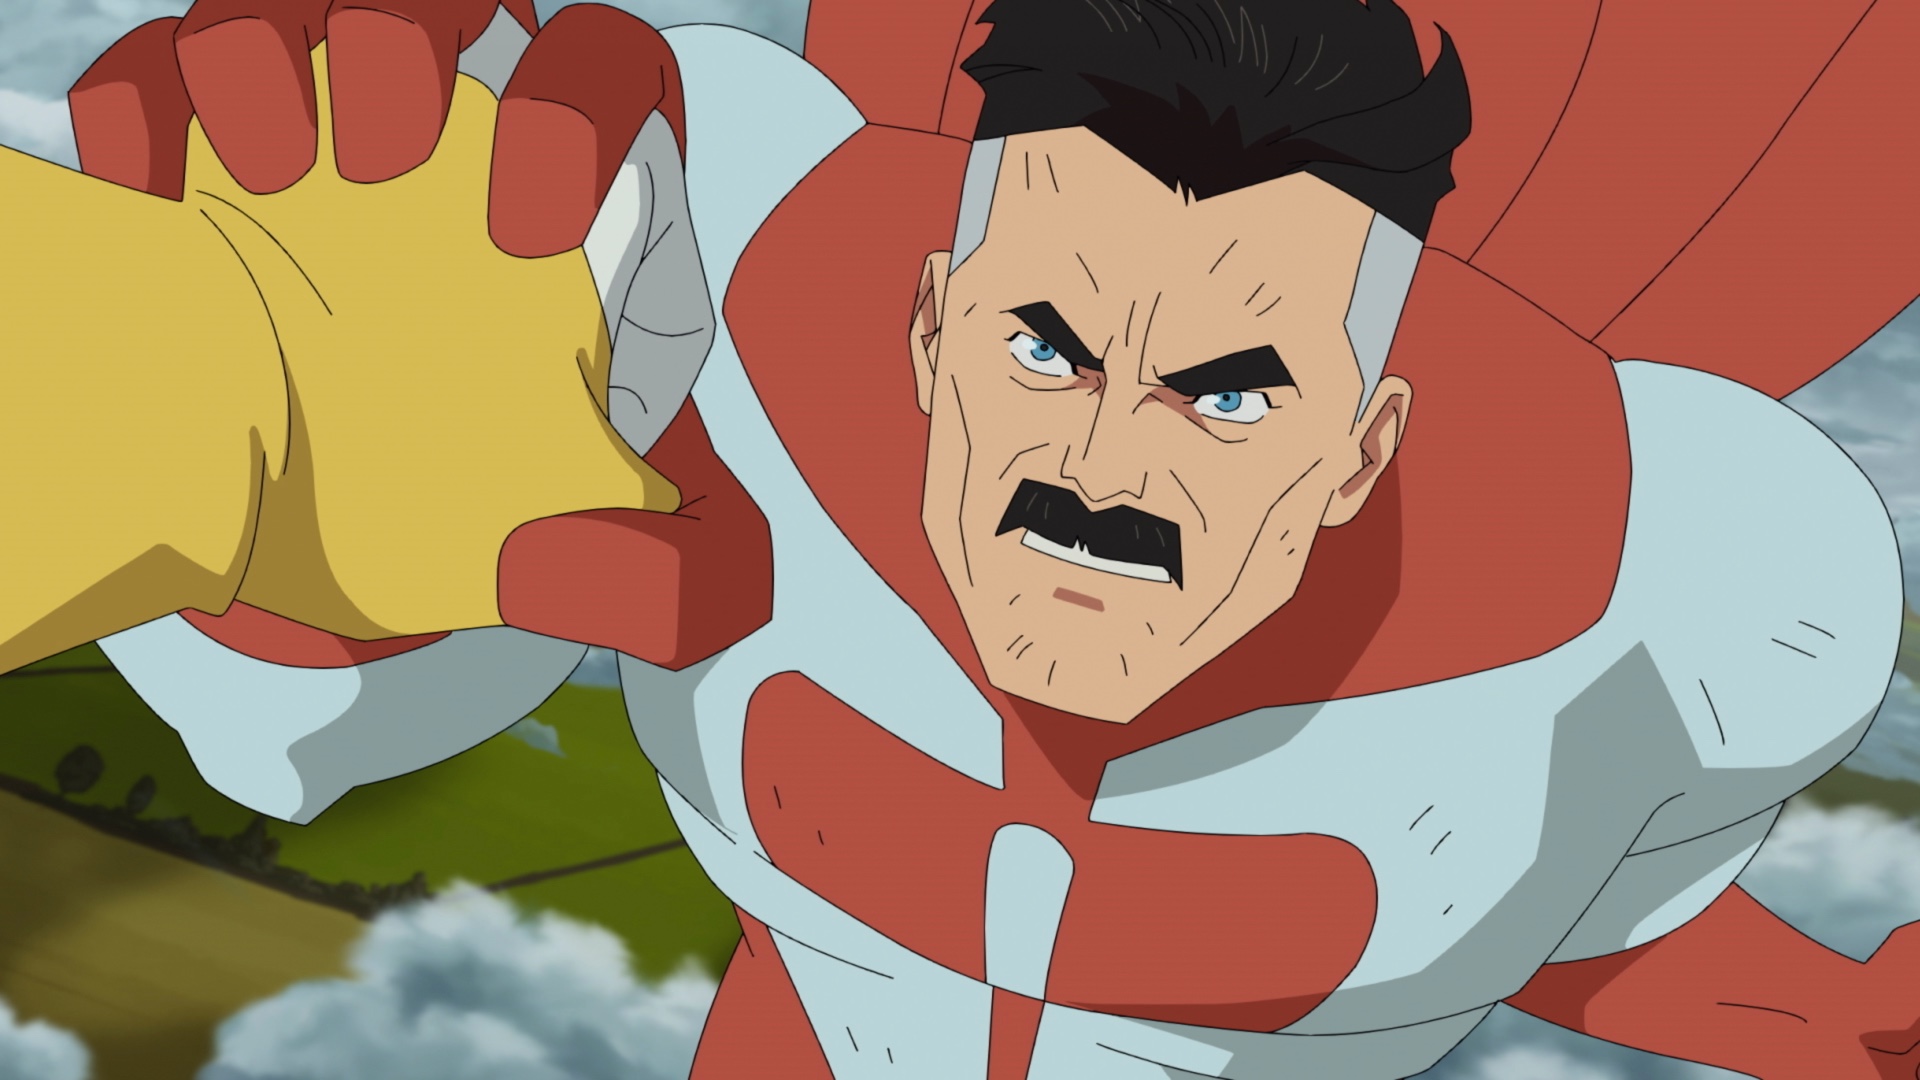 Invincible Episode 7 Improves Upon Its Already Great Source Material | Den  of Geek